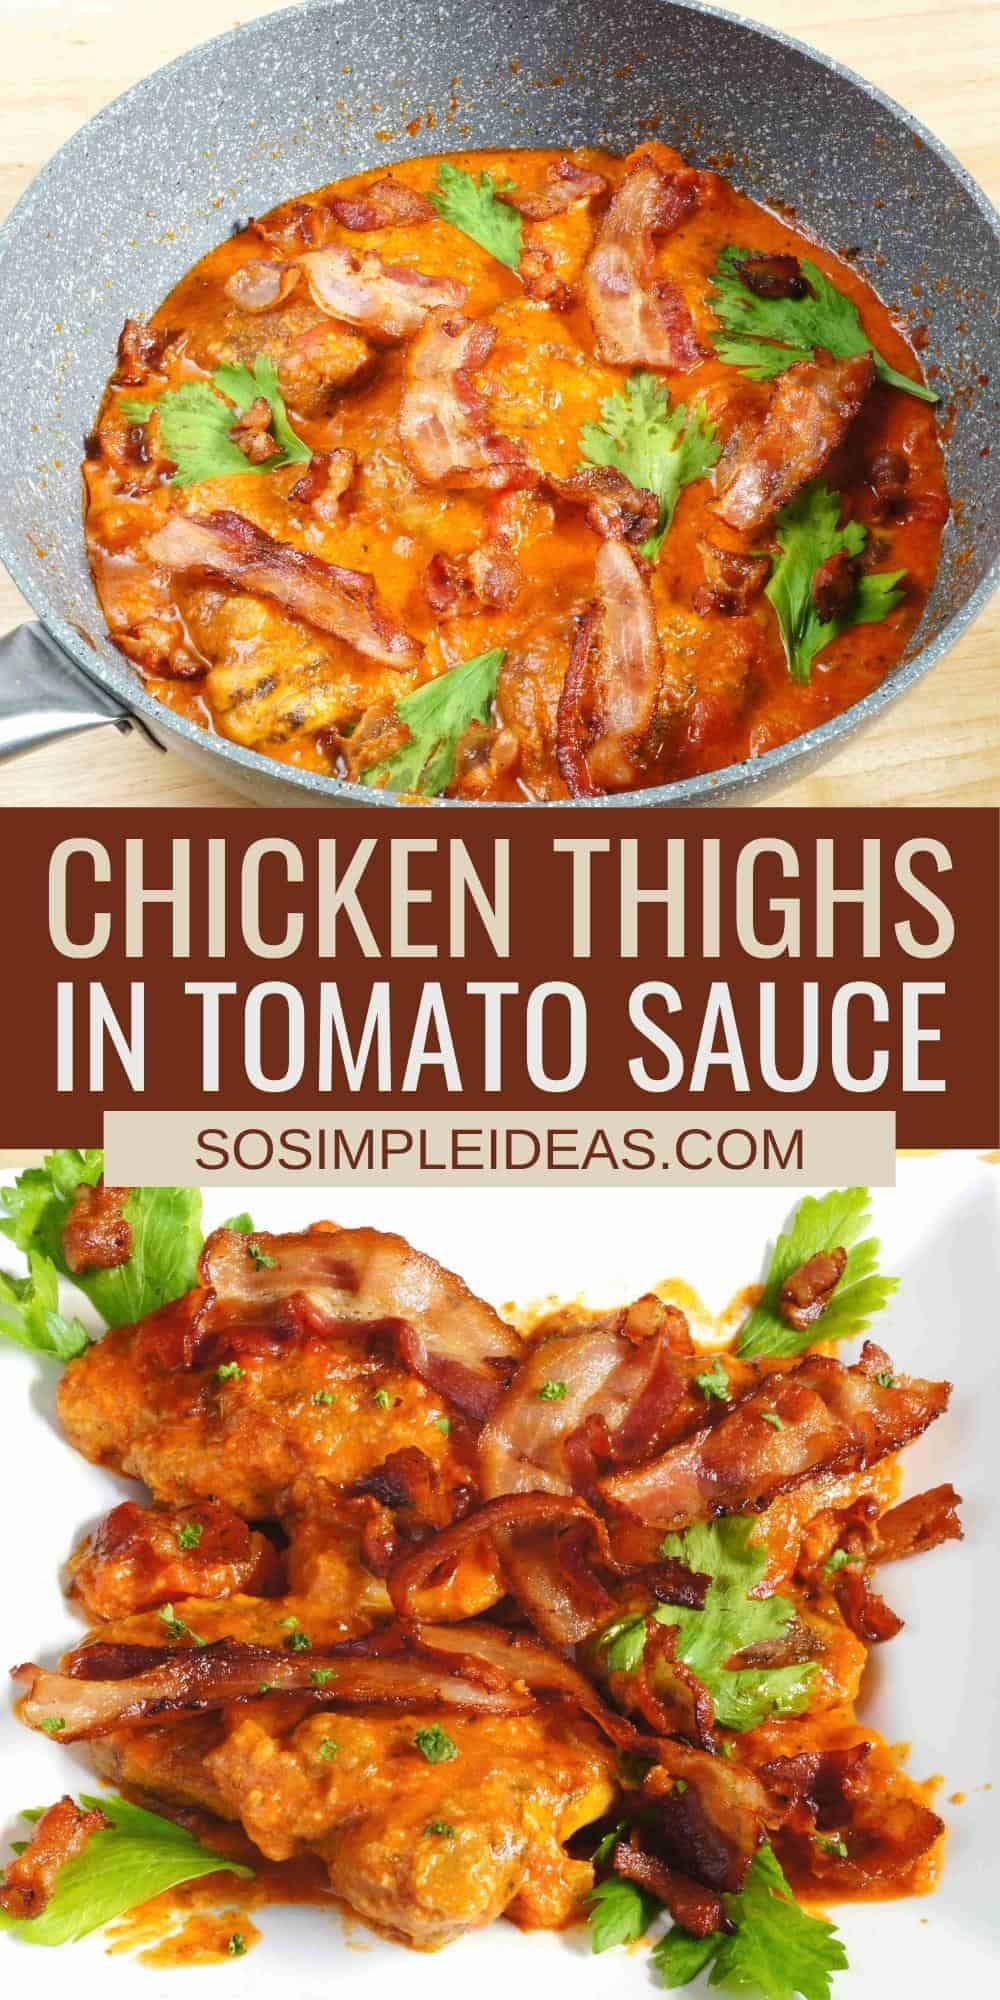 stove top chicken thighs recipe pinterest image.